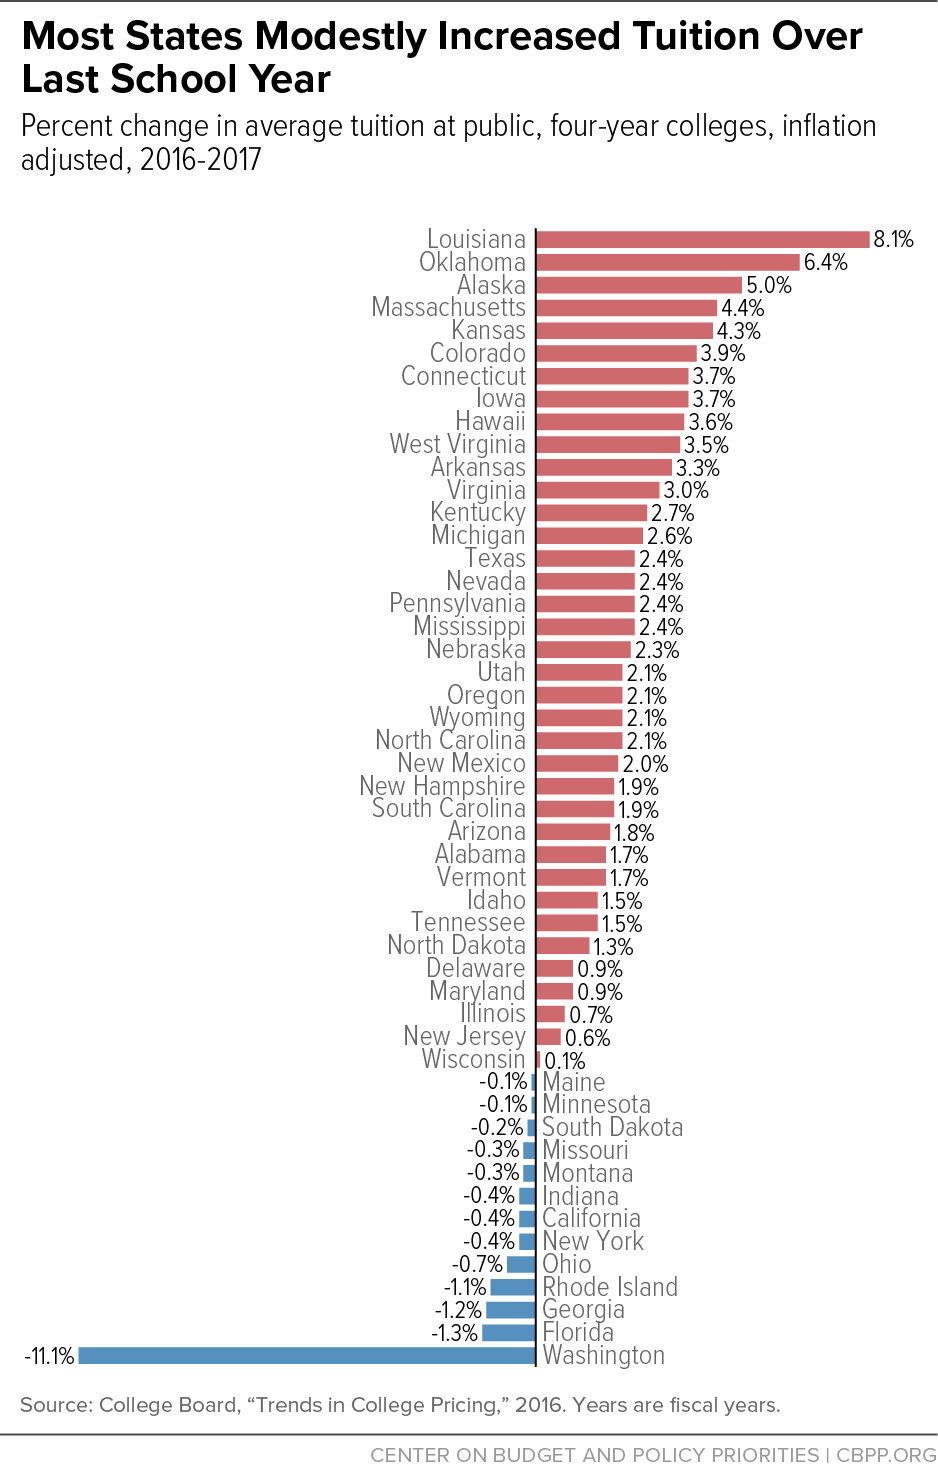 Most States Modestly Increased Tuition Over Last School Year